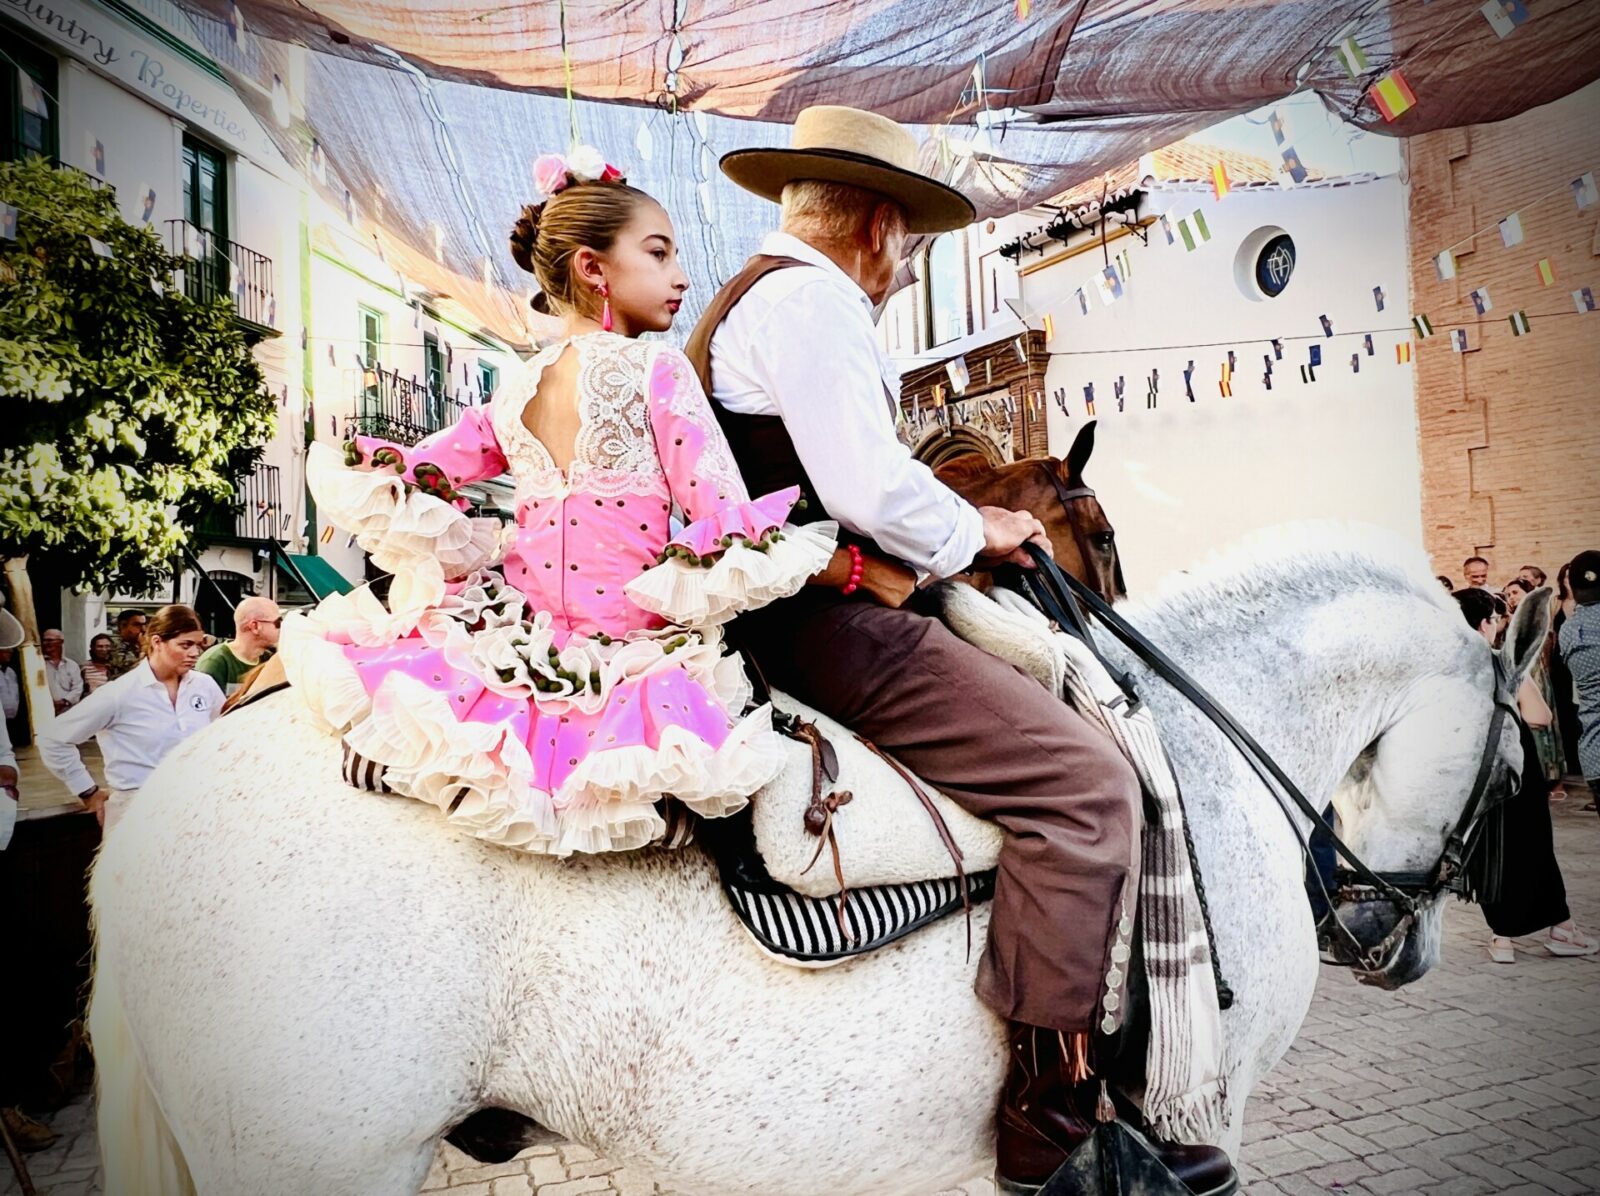 Image shows a grandfather with his daughter sat behind him on his horse as they participate in La Romería de San Sebastian at the Cómpeta Summer Feria.